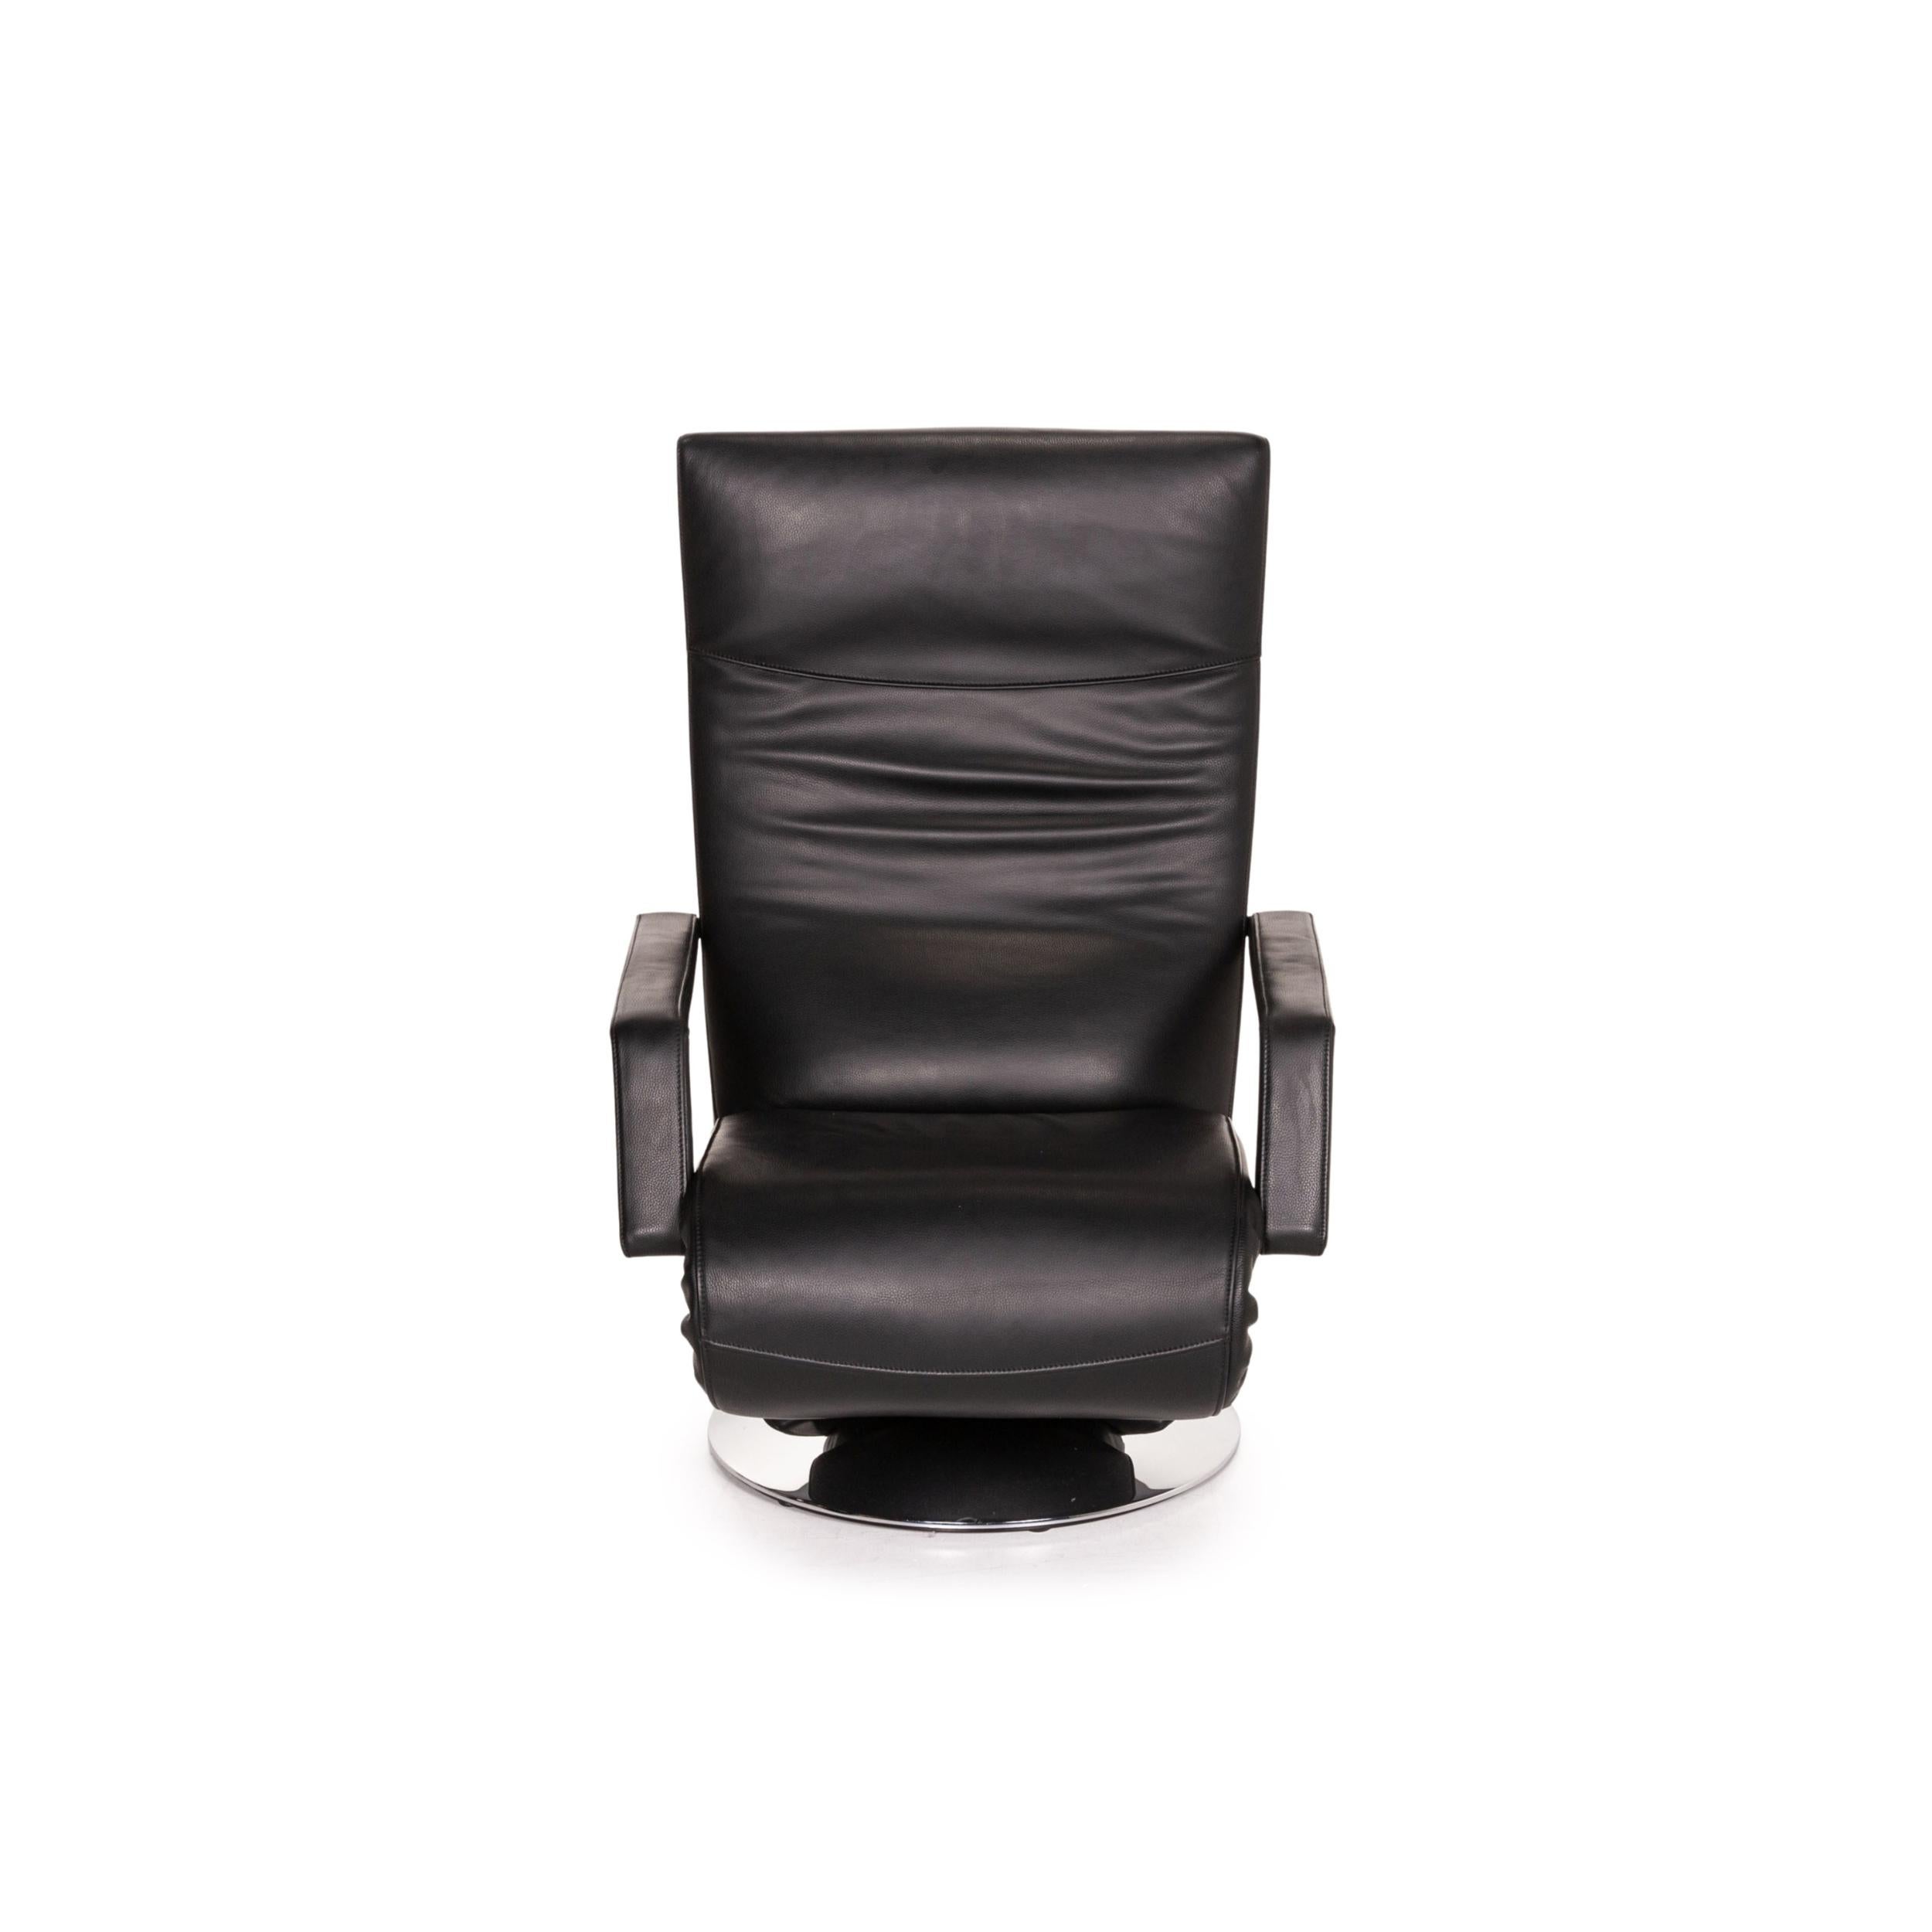 Fsm Evolo Leather Armchair Black Electrical Function Relax Function Recliner 2